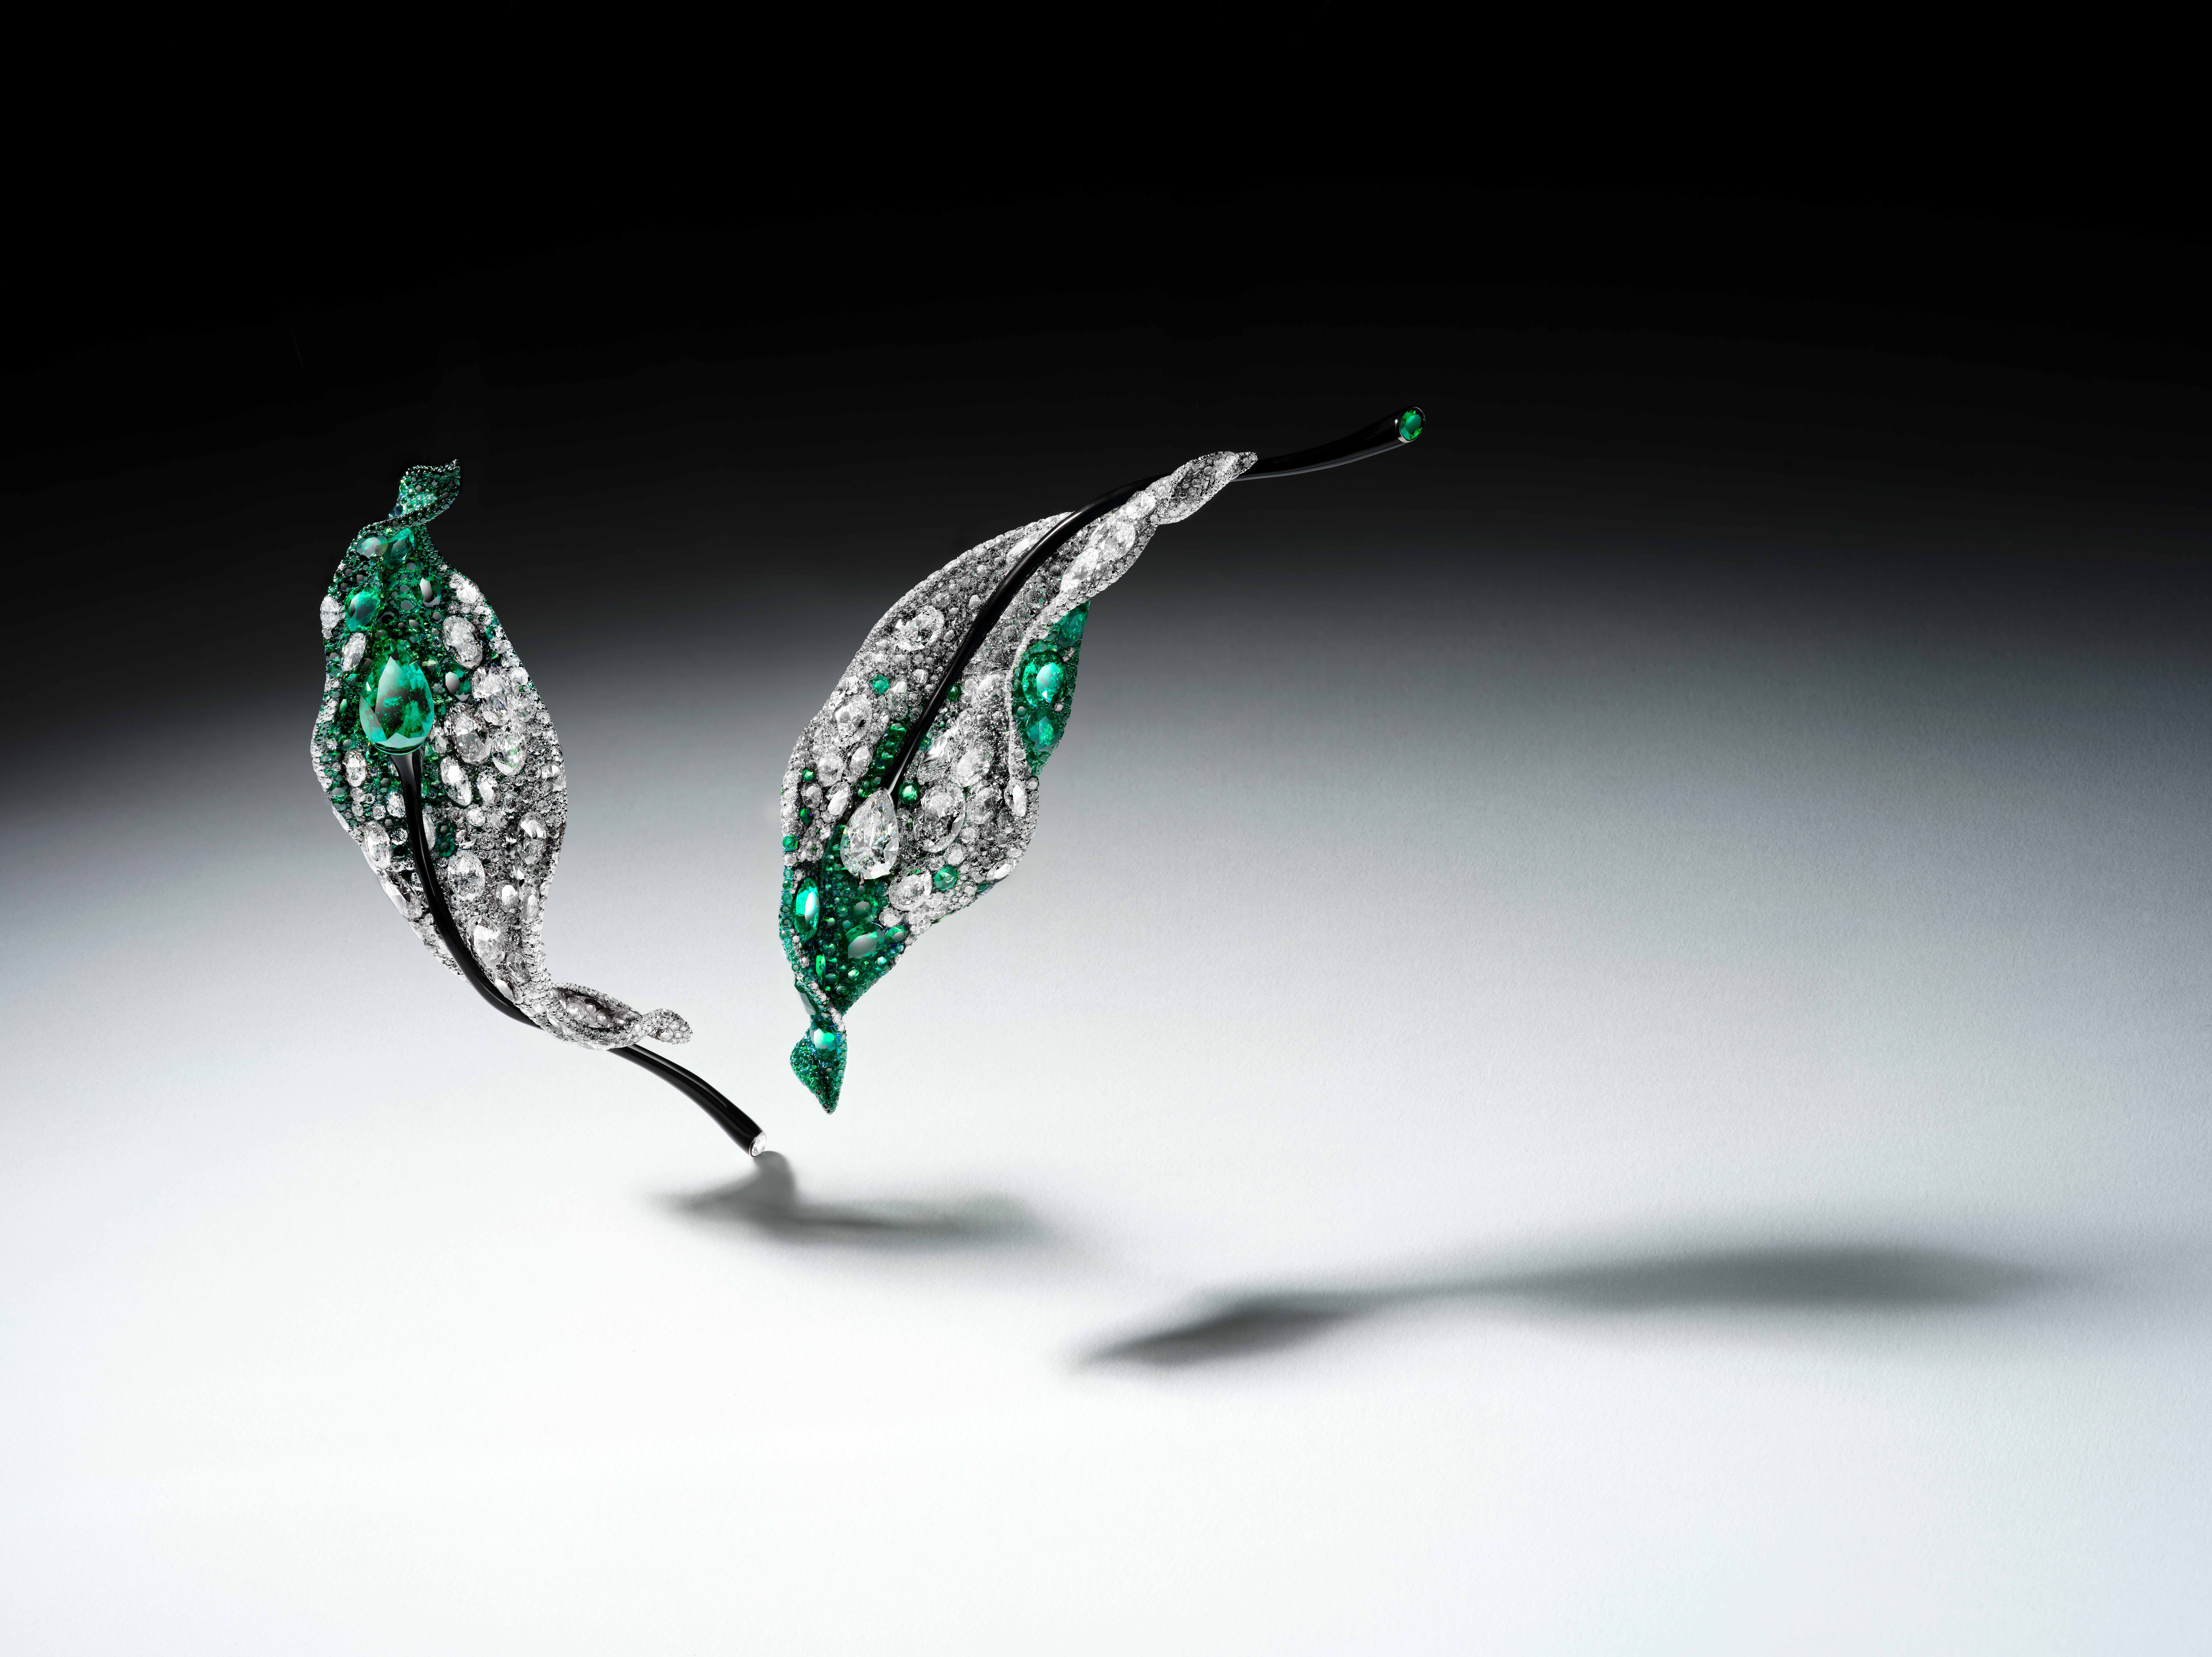 The Four Seasons Leaf brooches from the 20th Anniversary Collection are emblematic of CINDY CHAO The Art Jewel’s artistry and virtuosity.